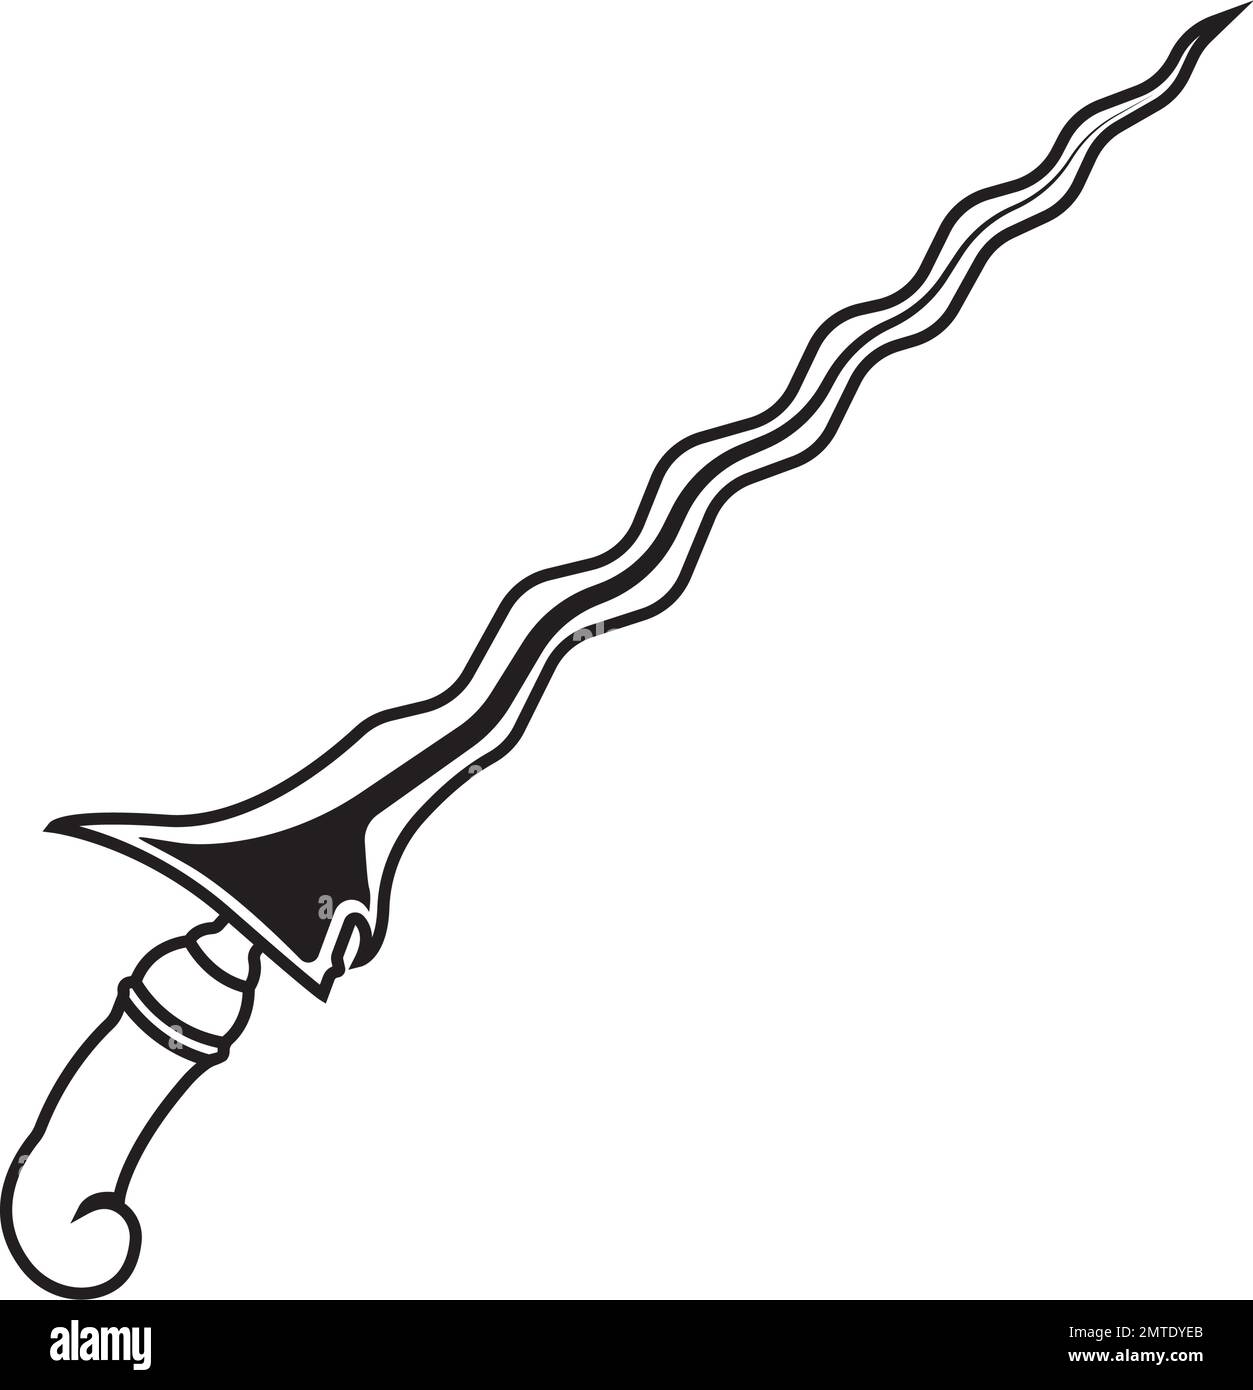 keris vector icon, a traditional weapon originating from Indonesia Stock Vector